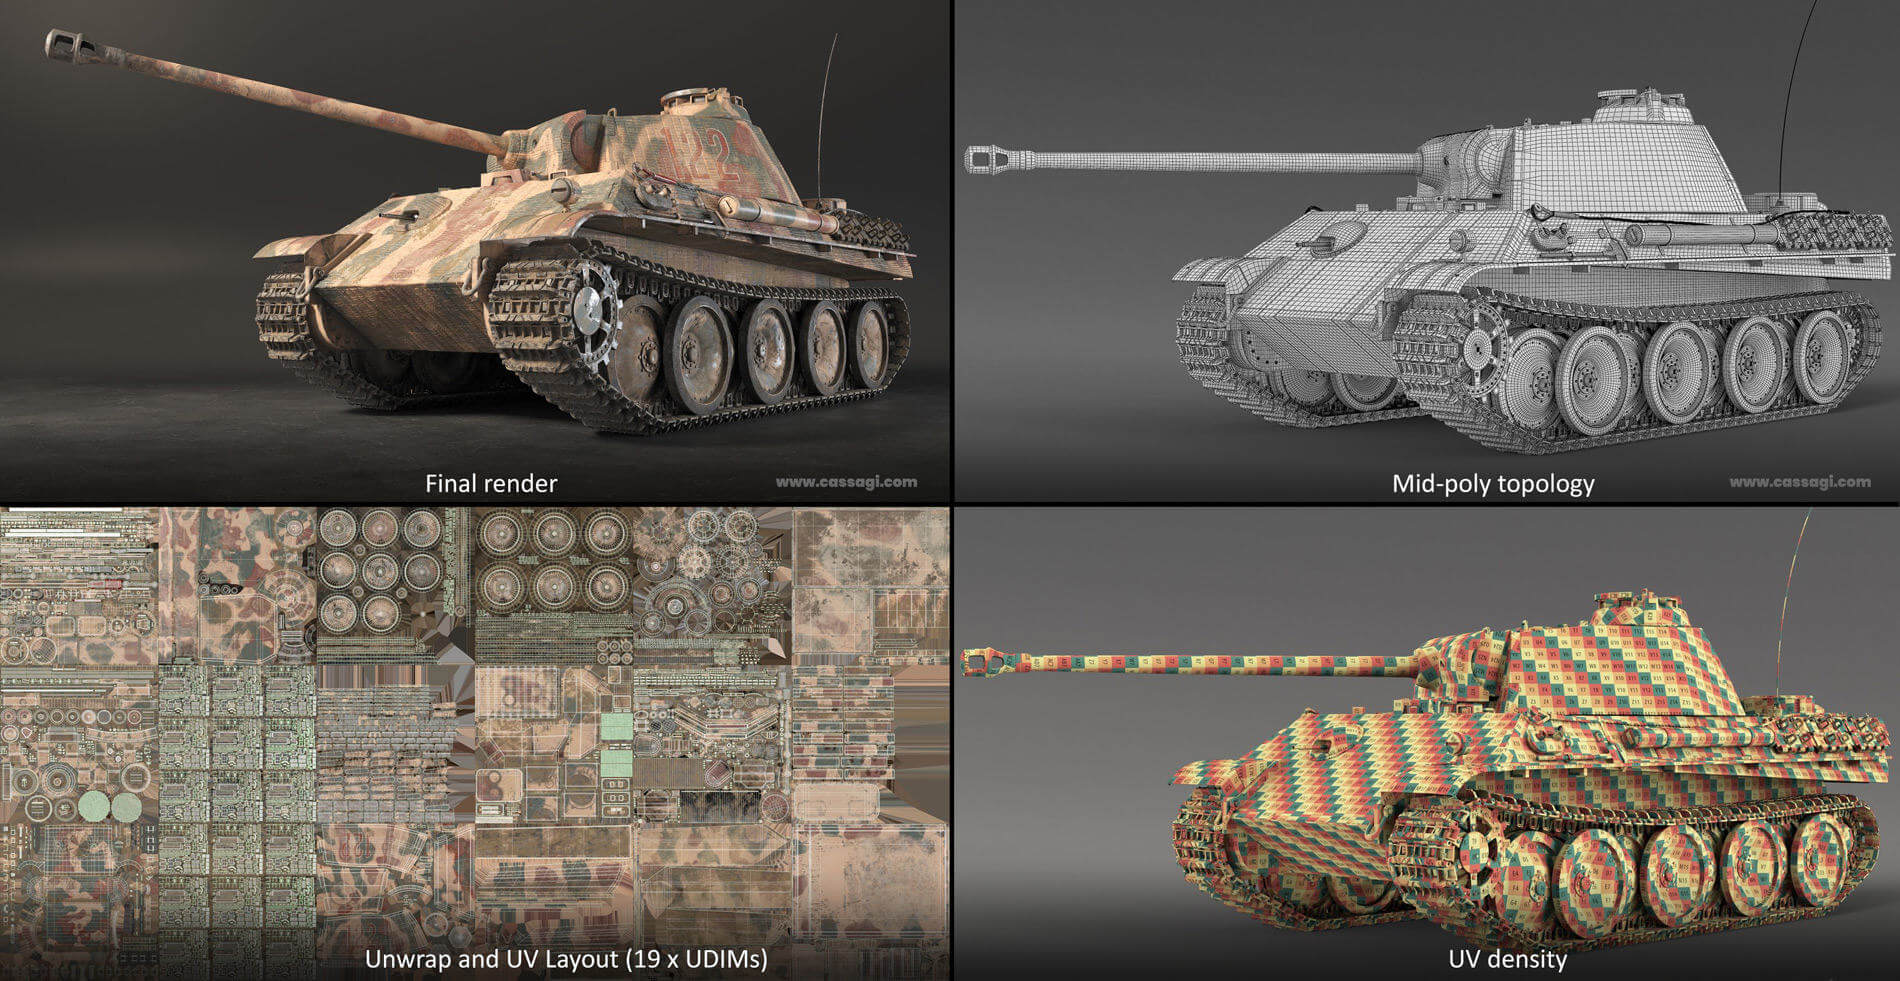 Final render, mid poly topology, UV density, Unwrap and UC Layout of a tank from the PC Game Hell Let Loose